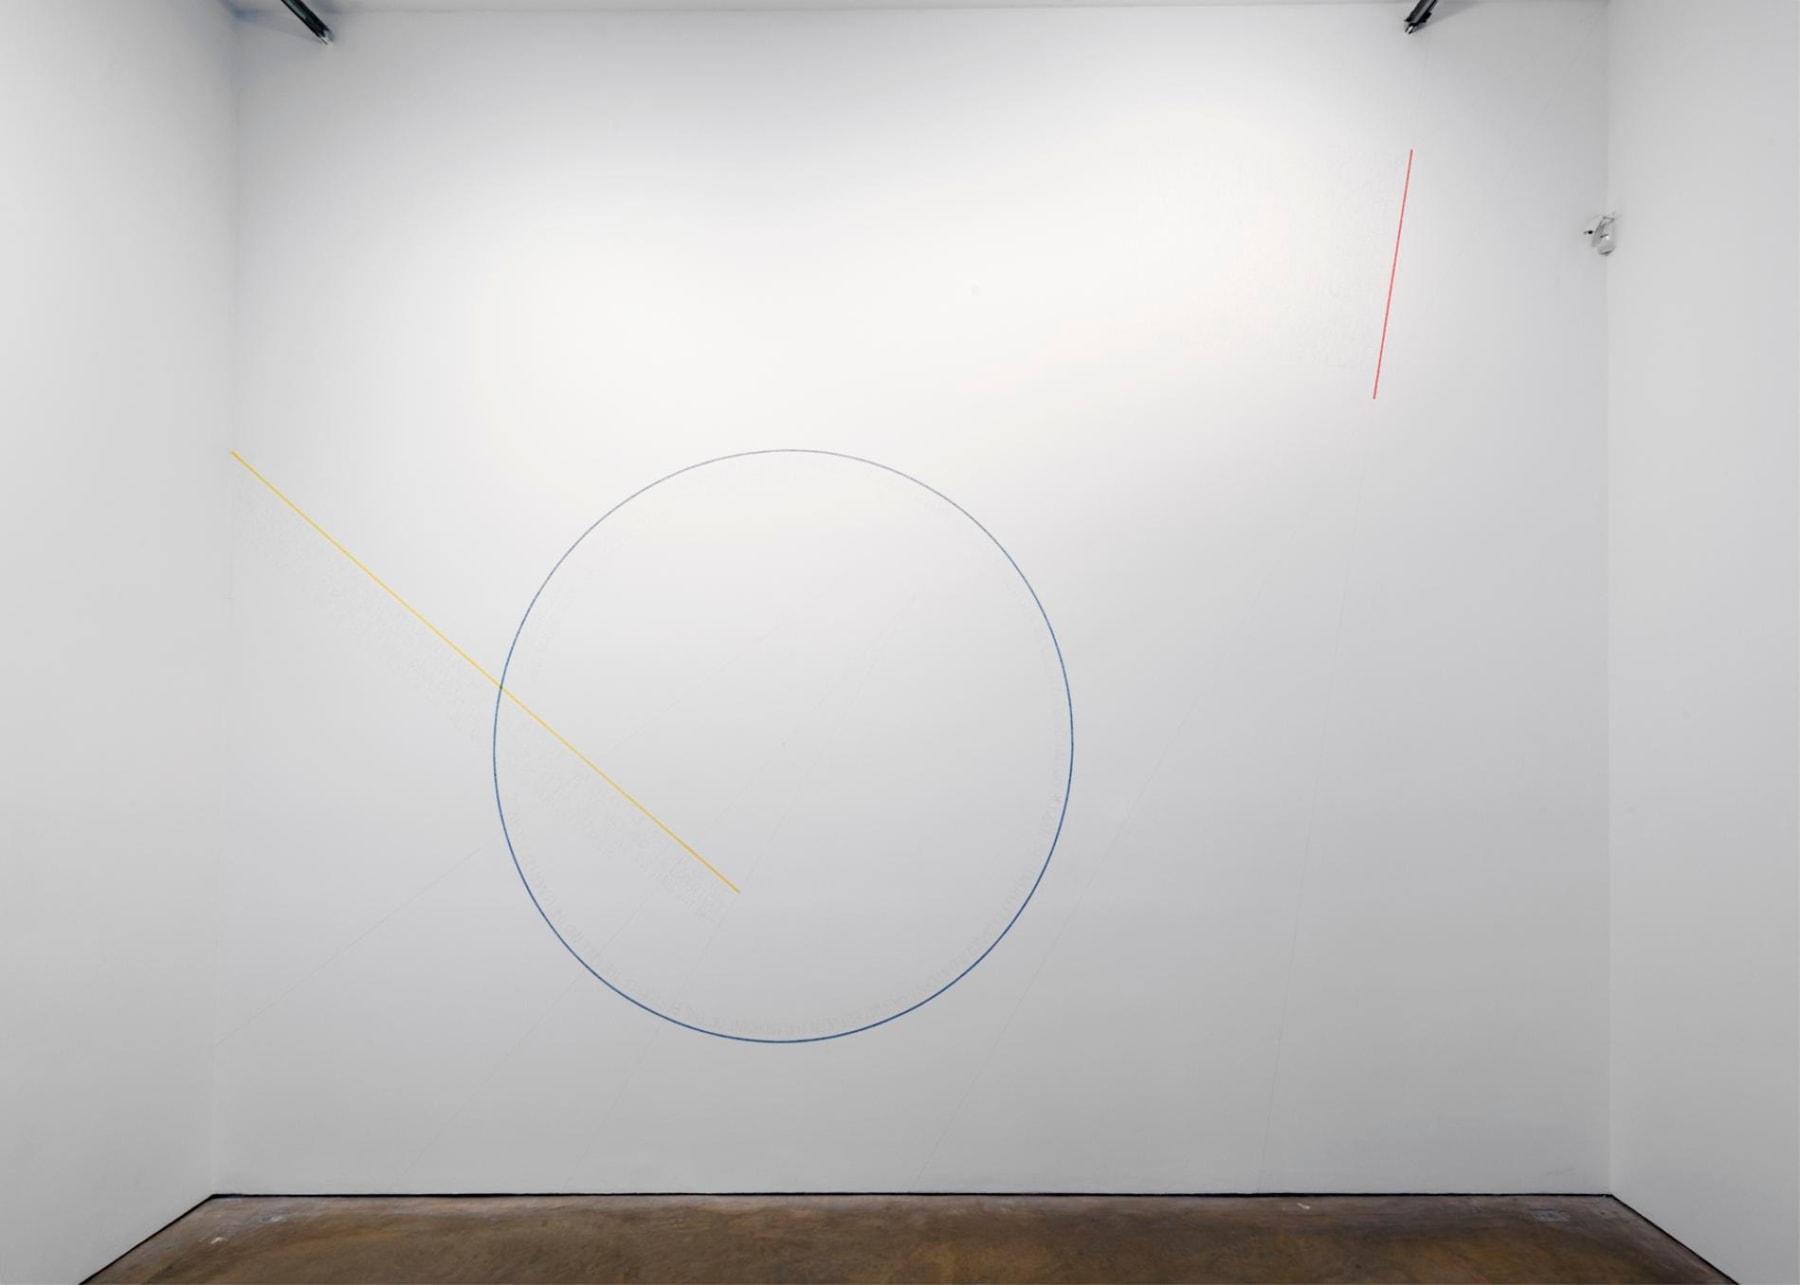 wall art of a circle, a yellow line, and a red line